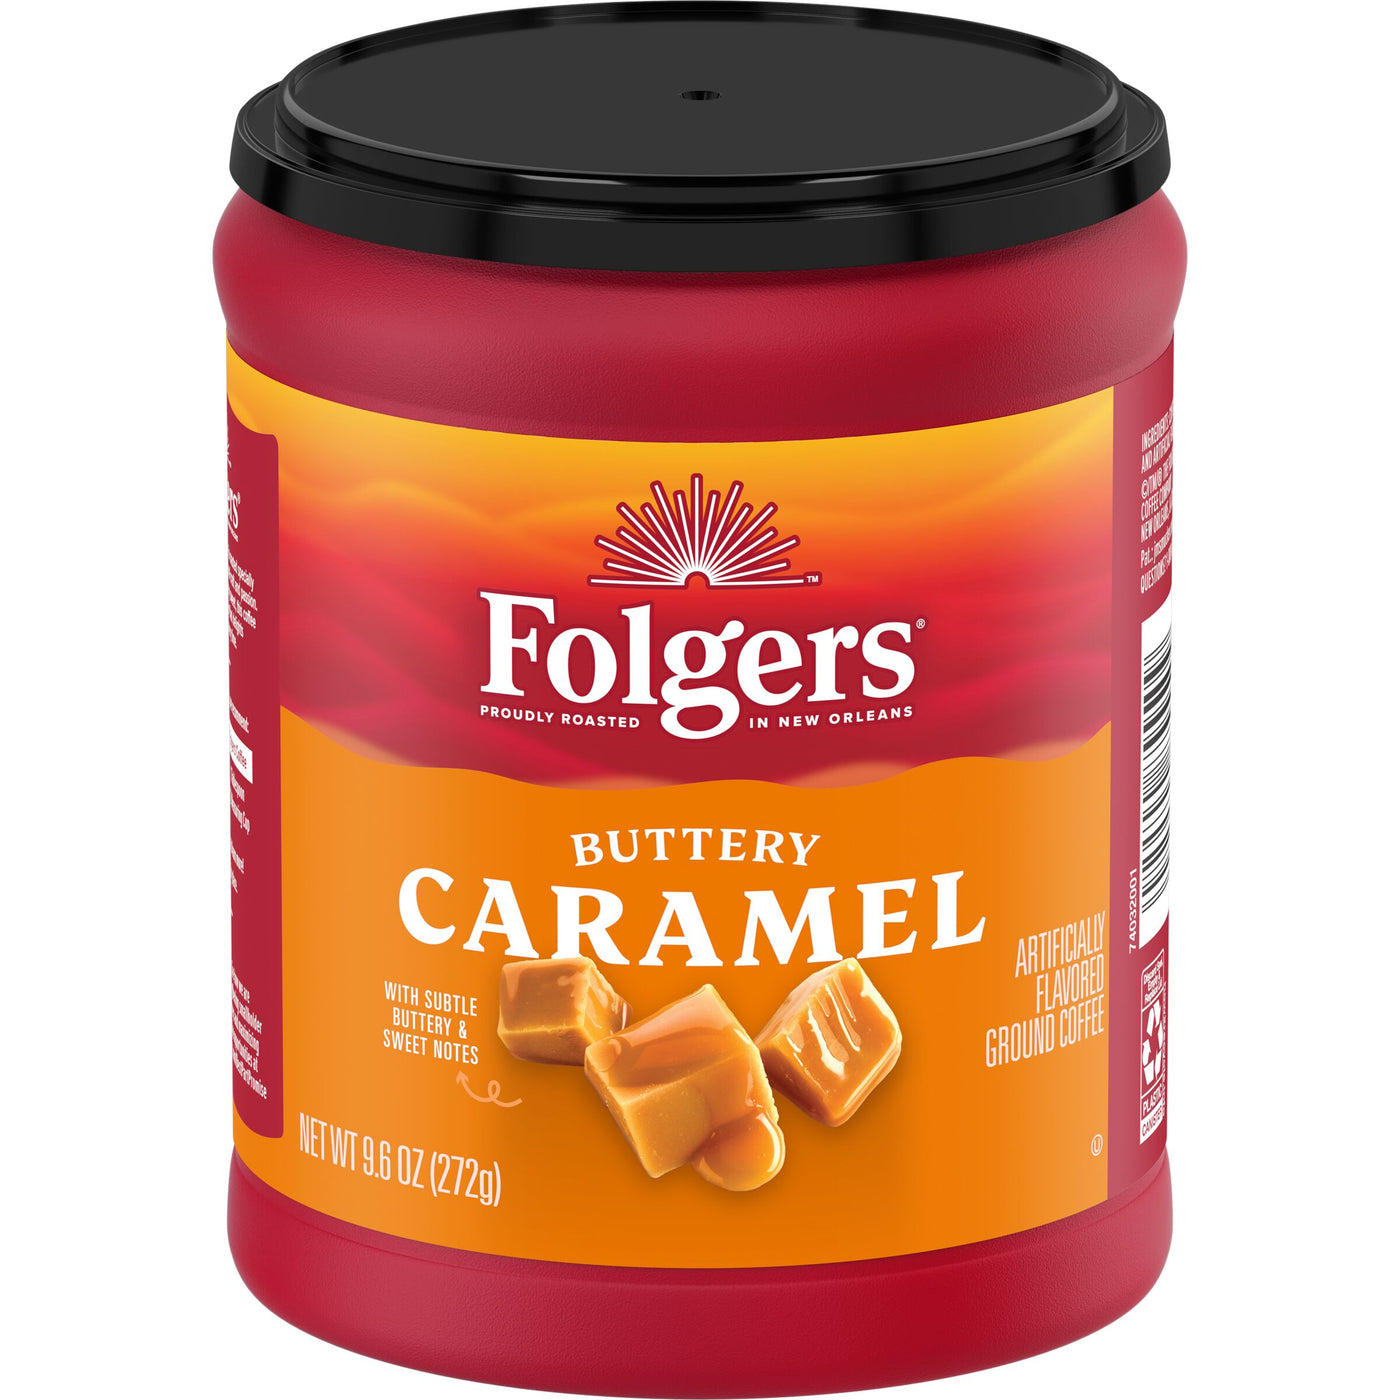 Folgers Buttery Caramel Flavored Ground Coffee, 9.6 oz